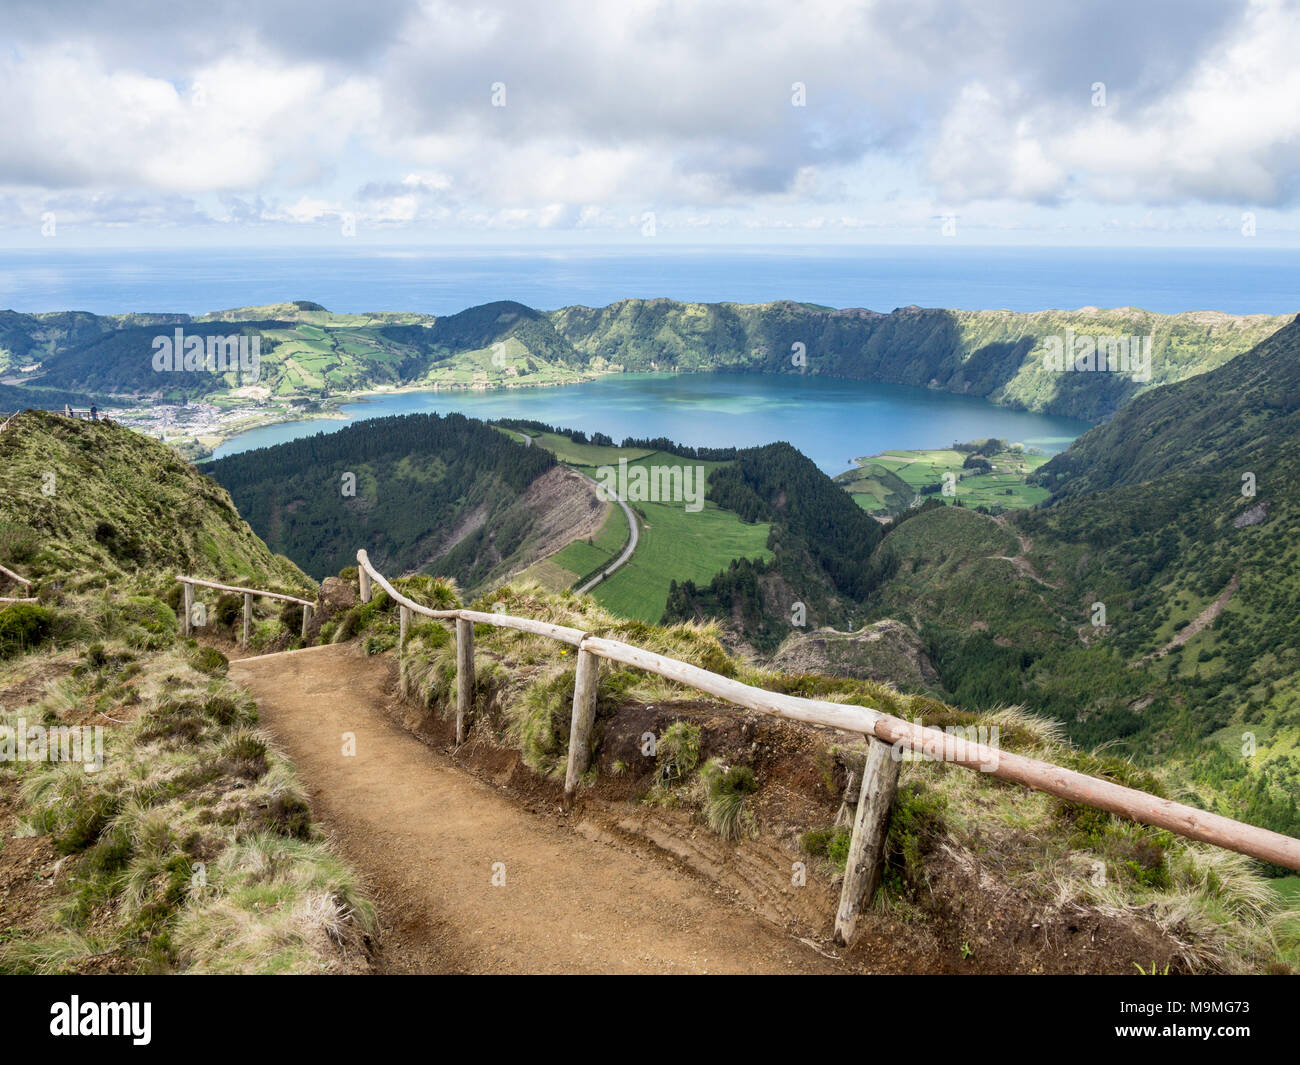 Path to the Road Below: A dirt path with wooden handrails winds over the hills to a spectacular viewpoint high over Sete Cidades and seems to connect to a road far below. Stock Photo